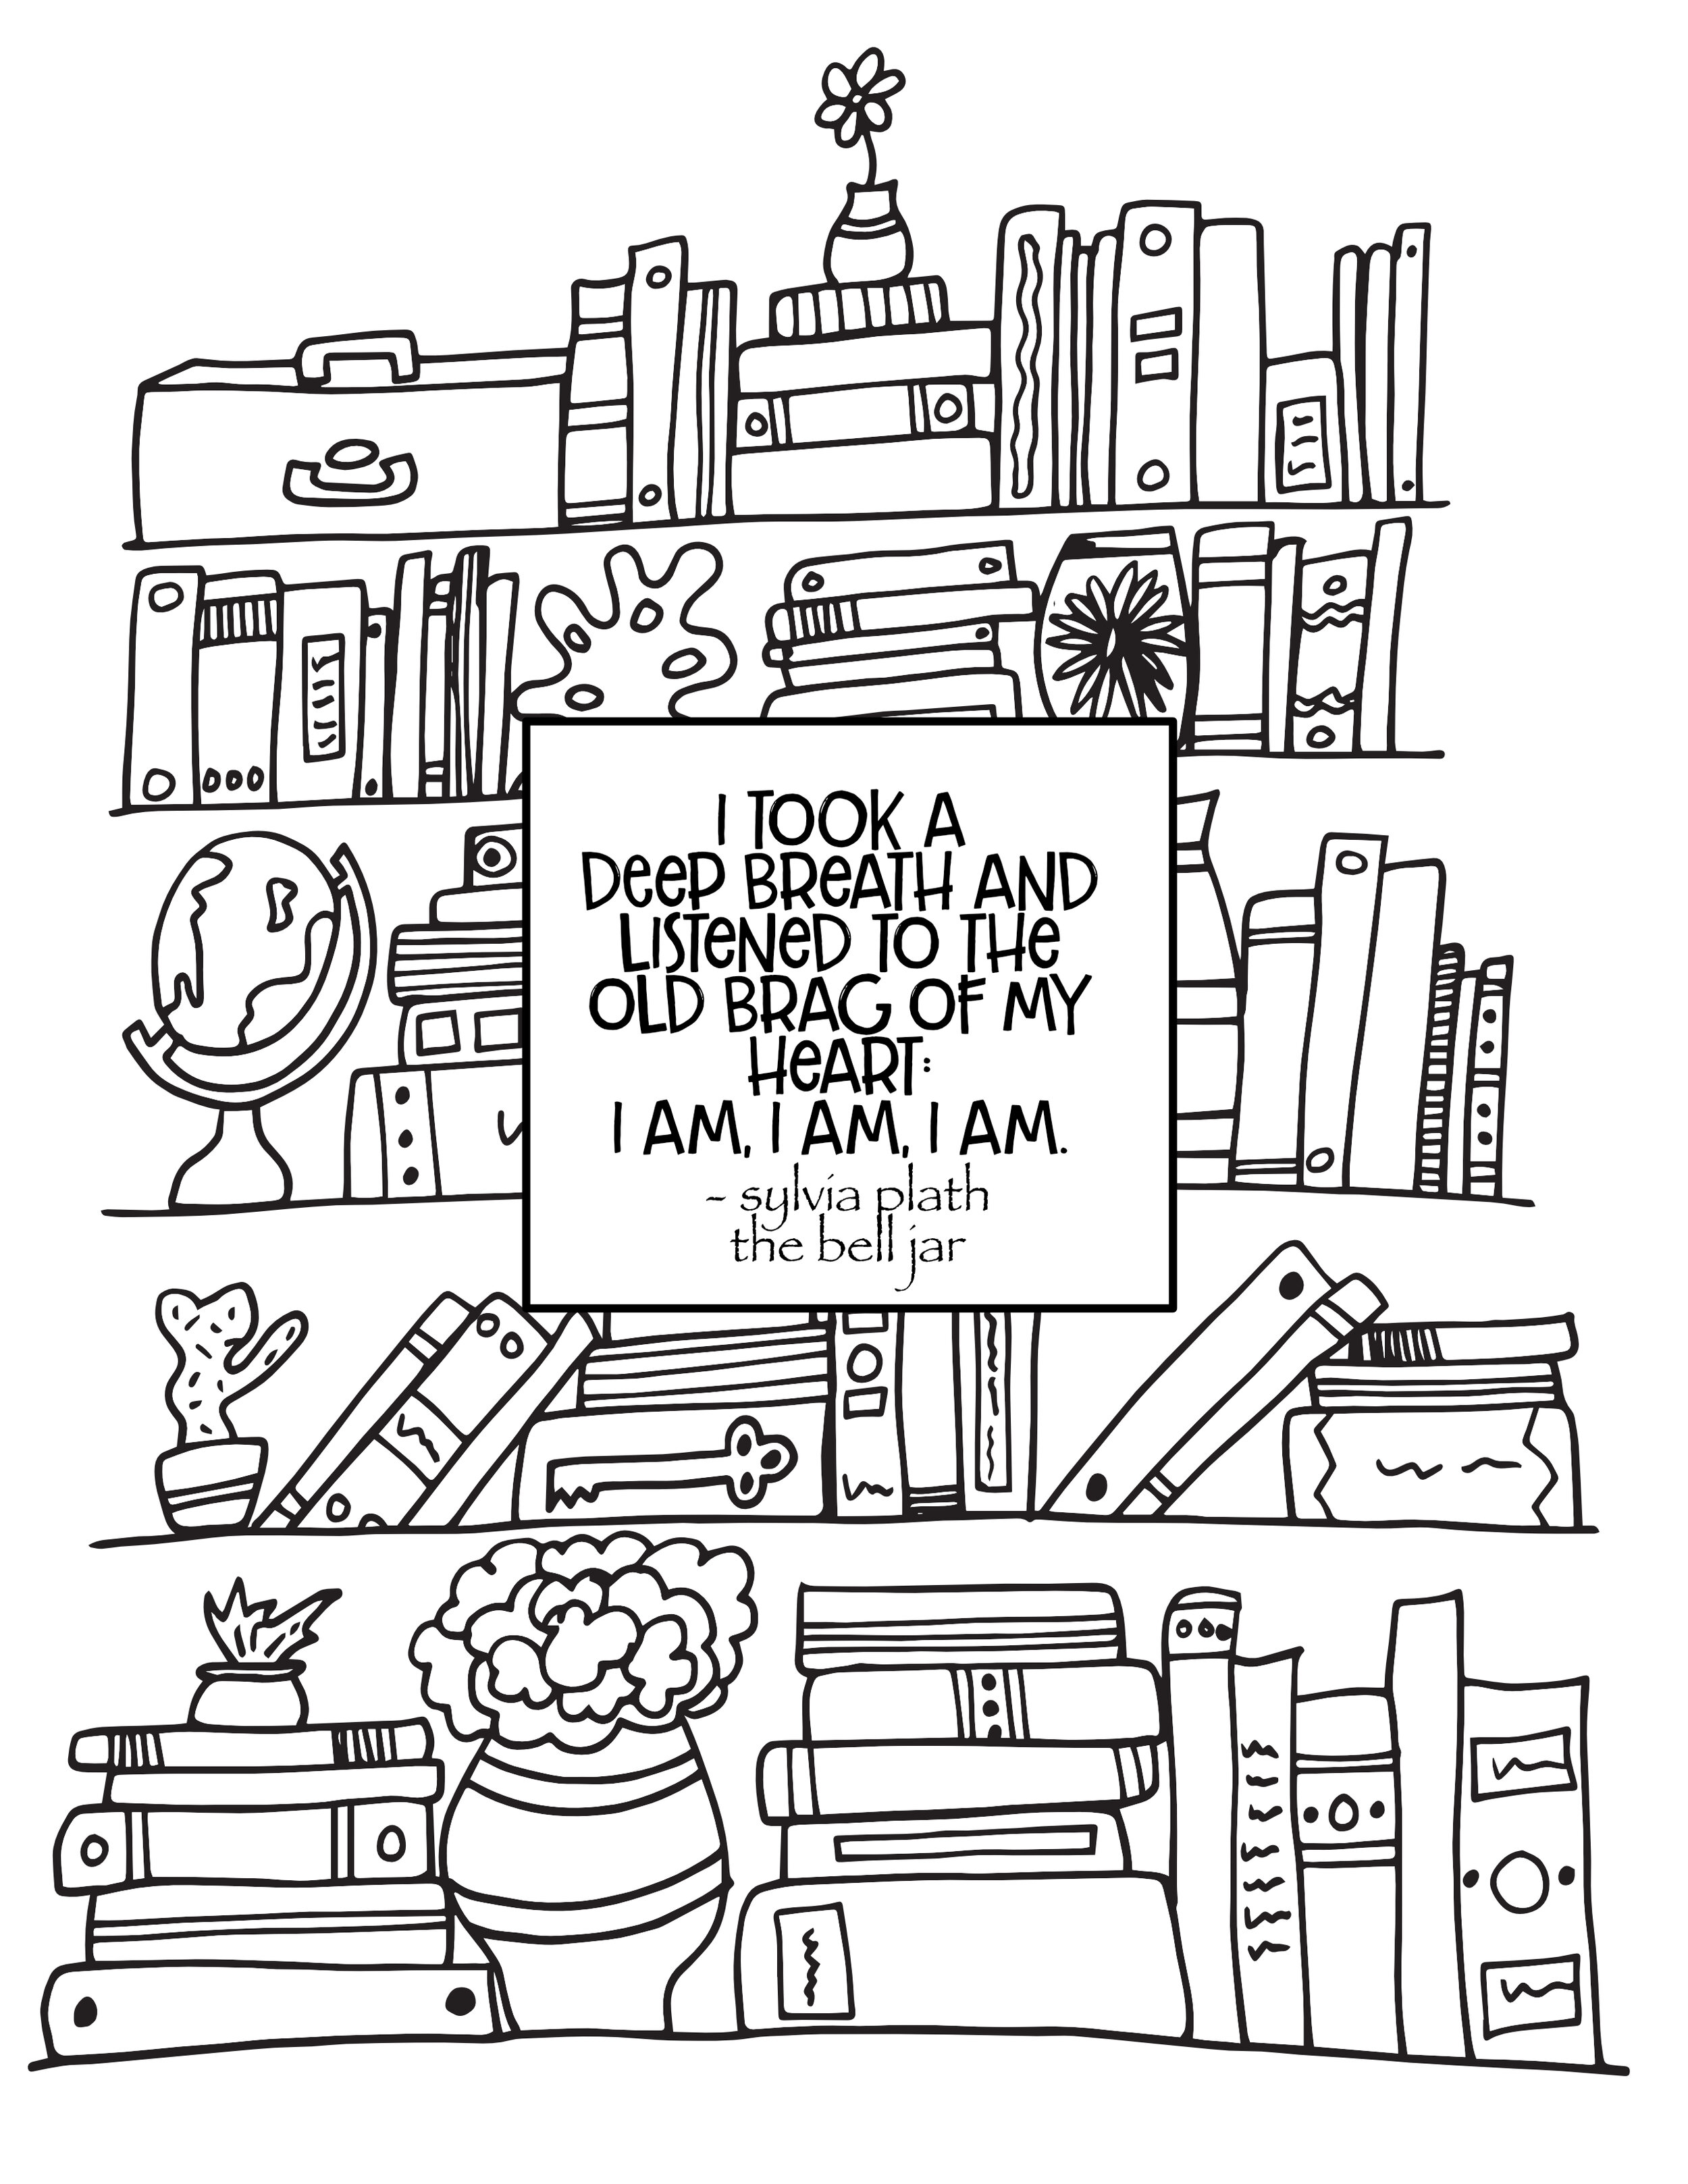 Free Printable Coloring Pages. Bell Jar quote with hand drawn bookshelf. “I took a deep breath and listened to the old brag of my heart: I am, I am, I am.”